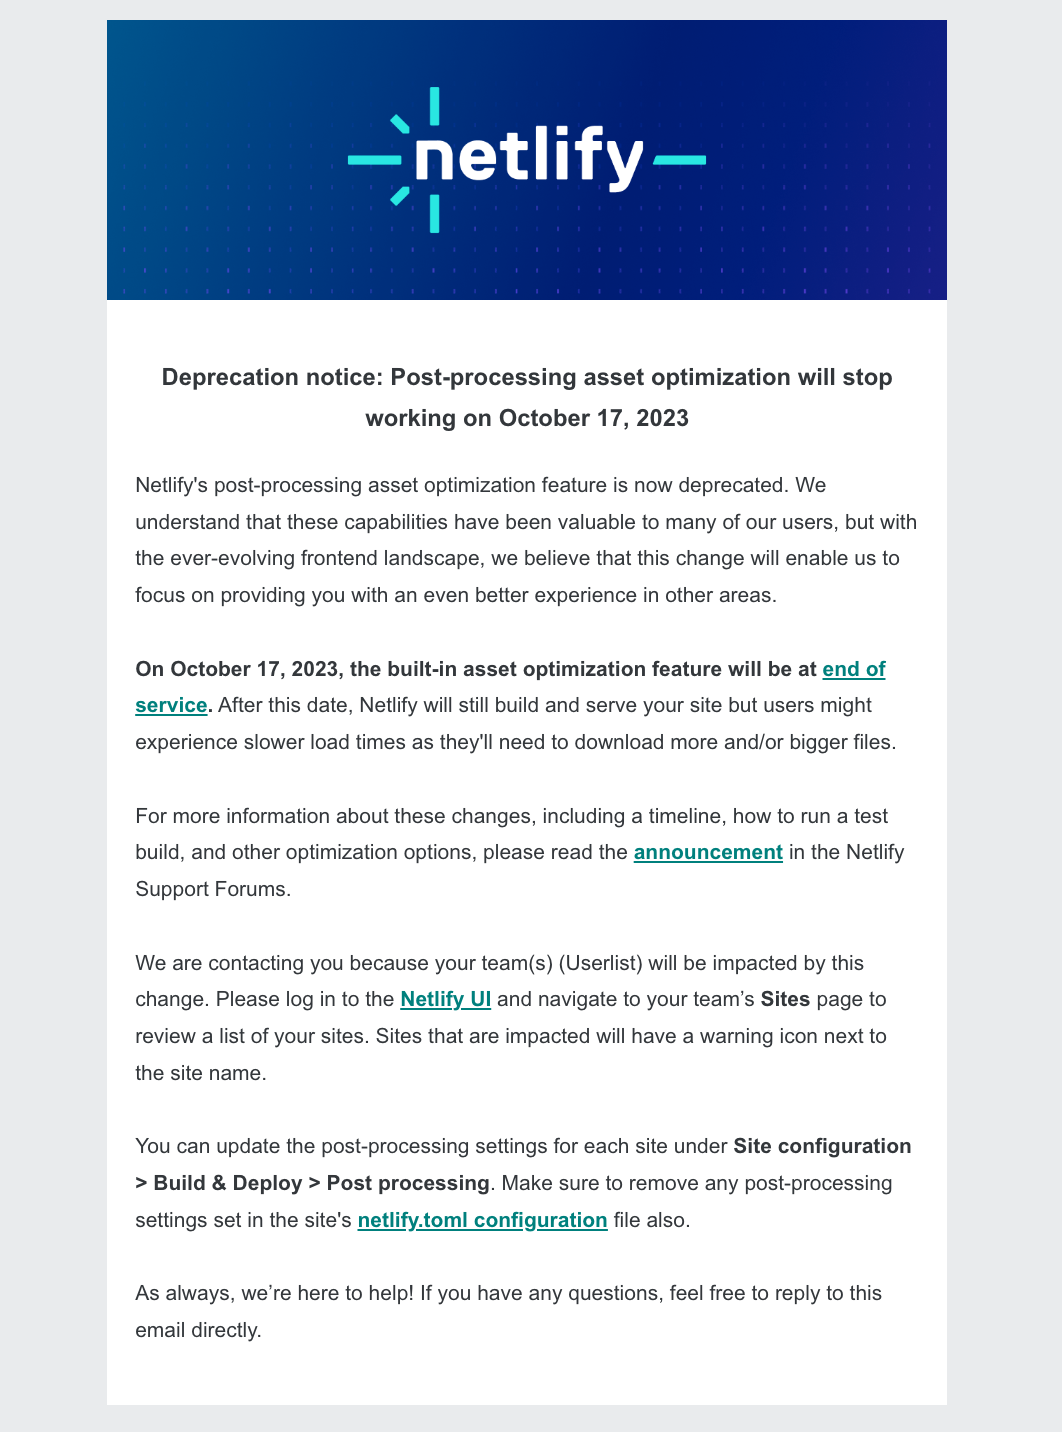 Email Marketing for Devtools: Screenshot of Netlify's sunset email